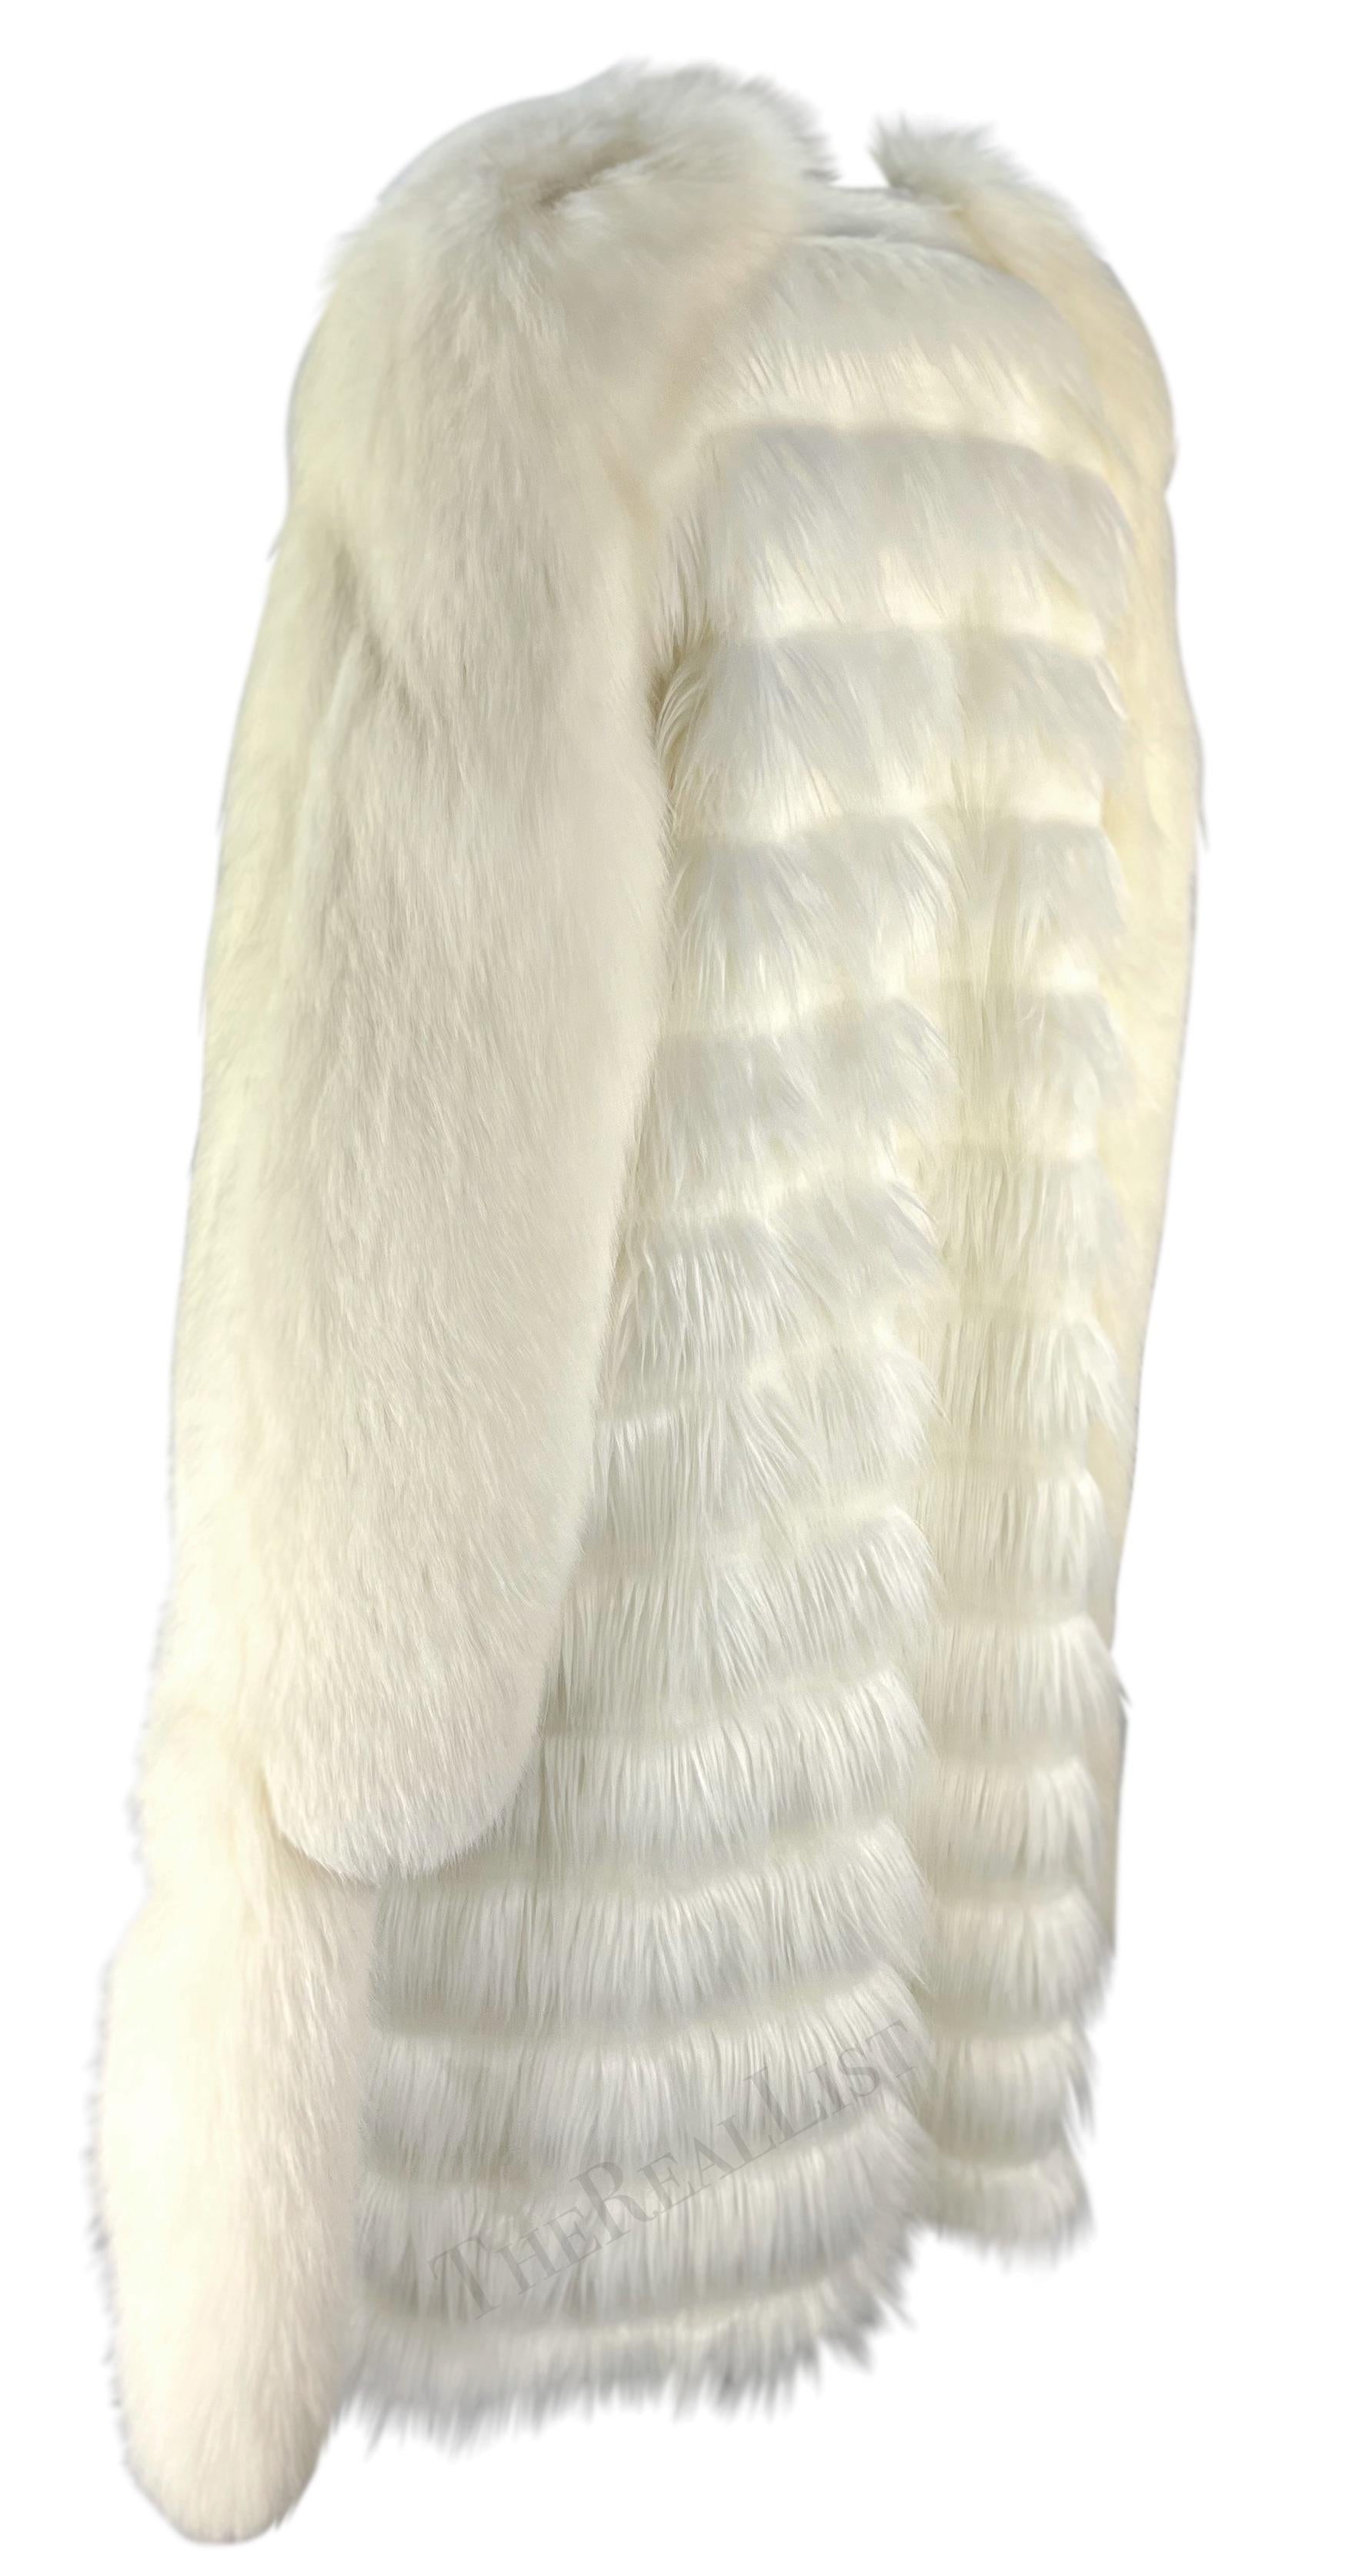 F/W 2003 Yves Saint Laurent by Tom Ford White Fox / Faux Fur Runway Coat For Sale 4